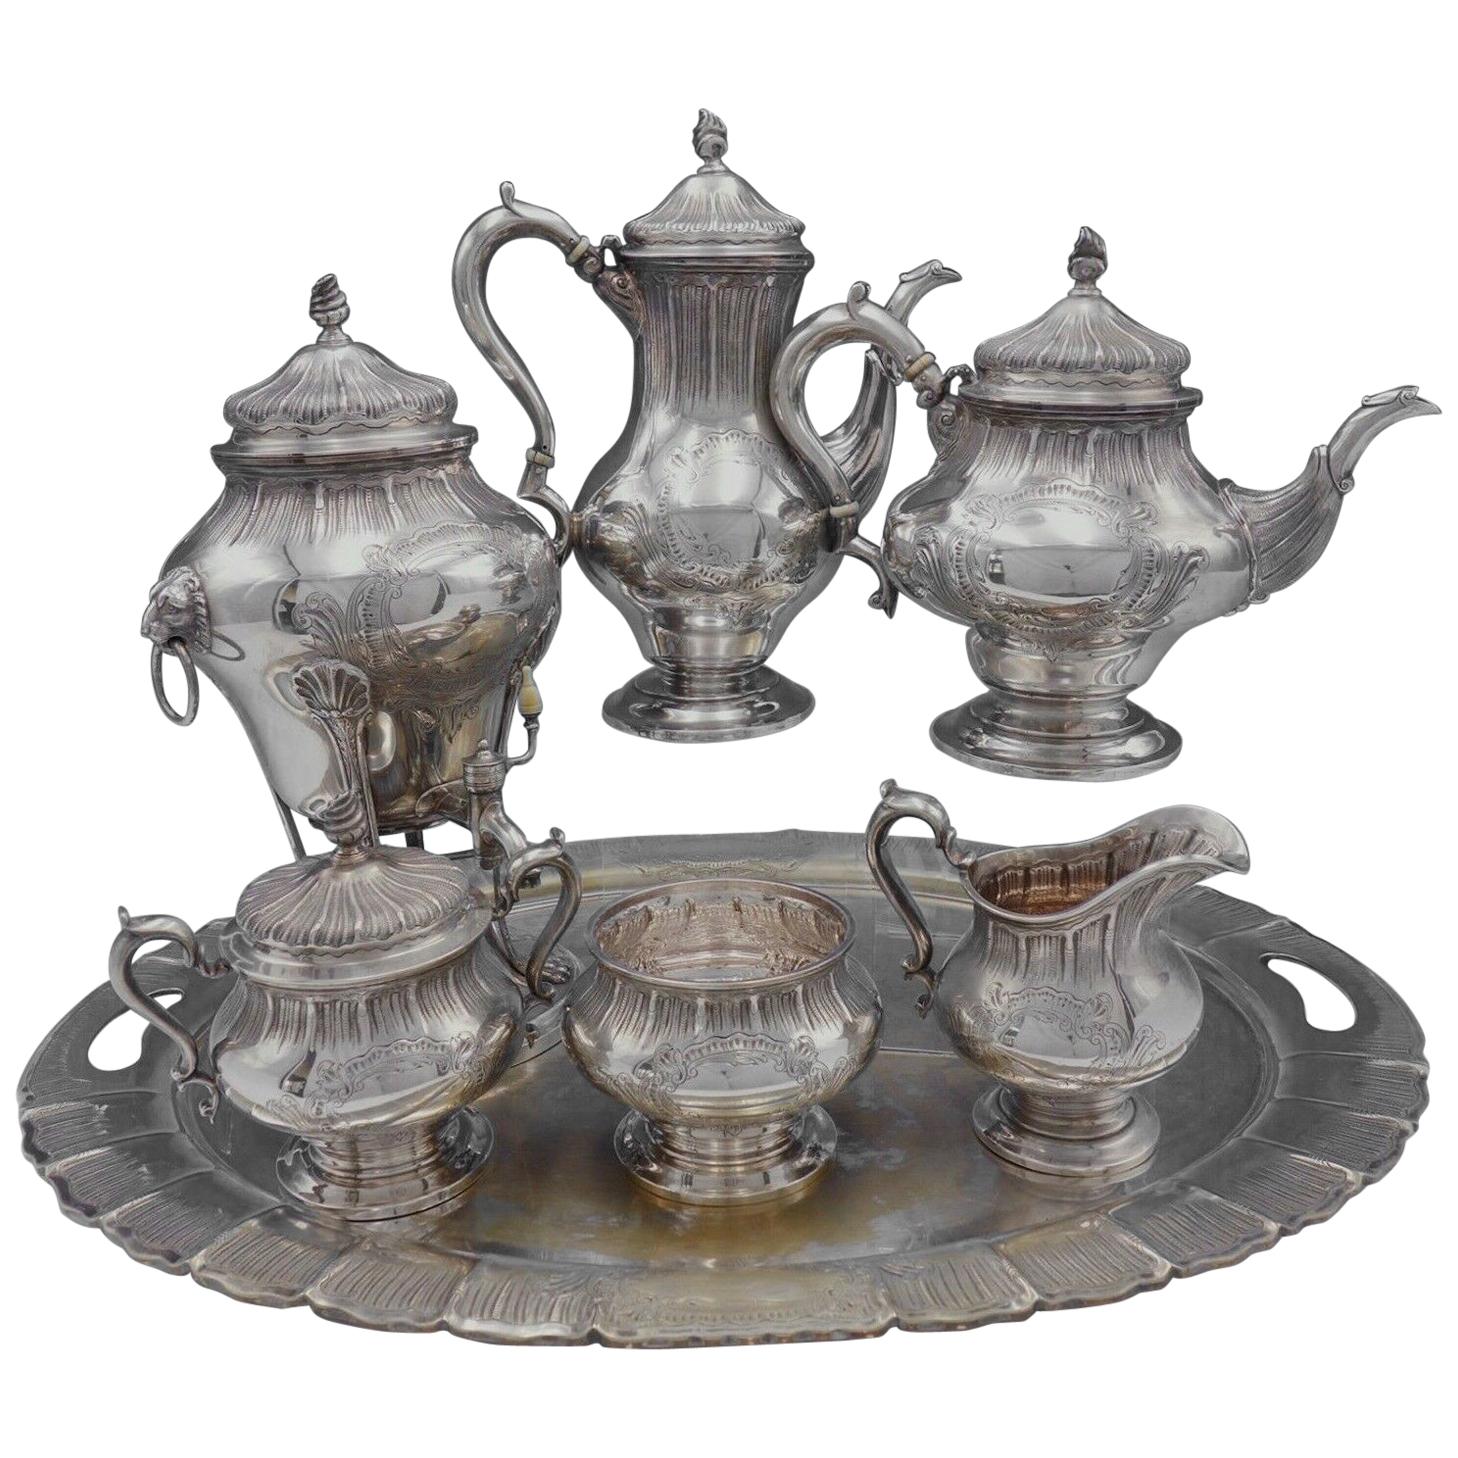 George II by Tuttle Sterling Silver Tea Set 6-Piece with Silverplate Tray